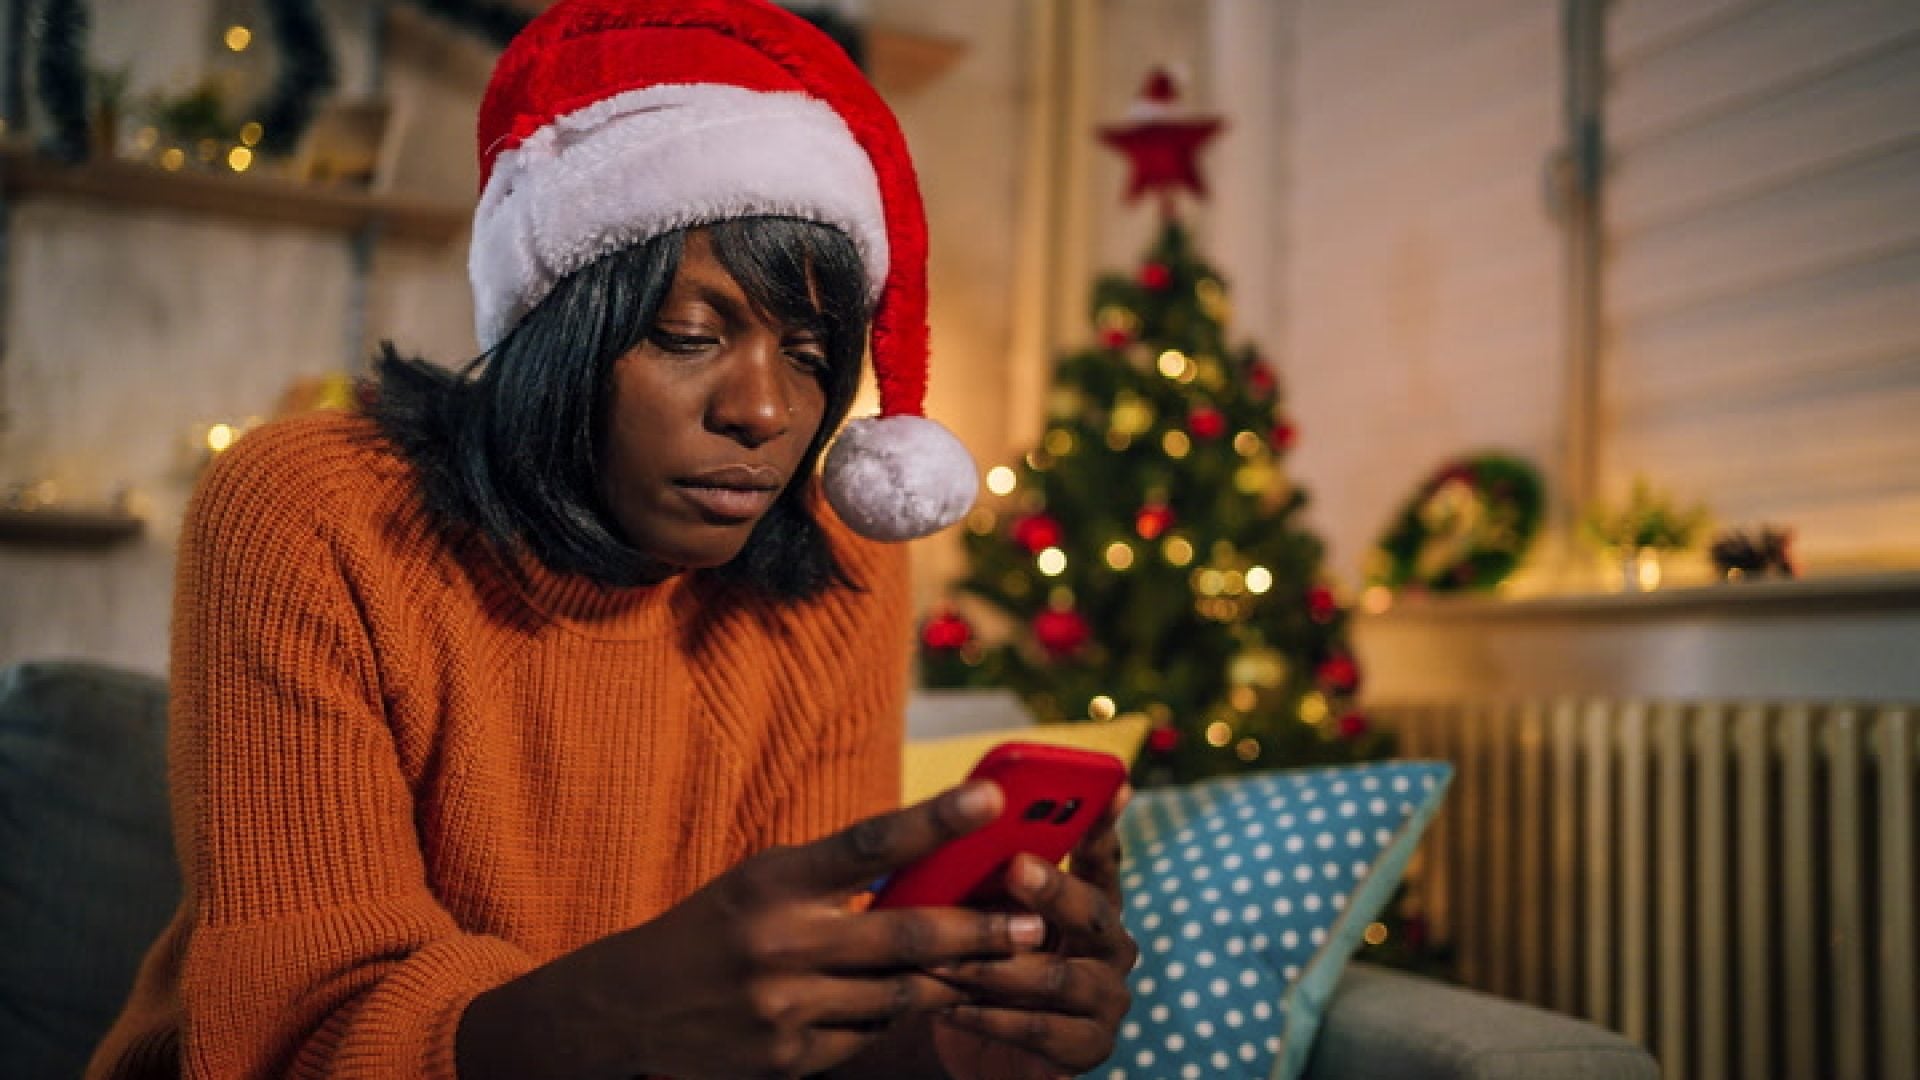 WATCH: Dealing With Seasonal Blues? Here’s How To Navigate Holiday Grief